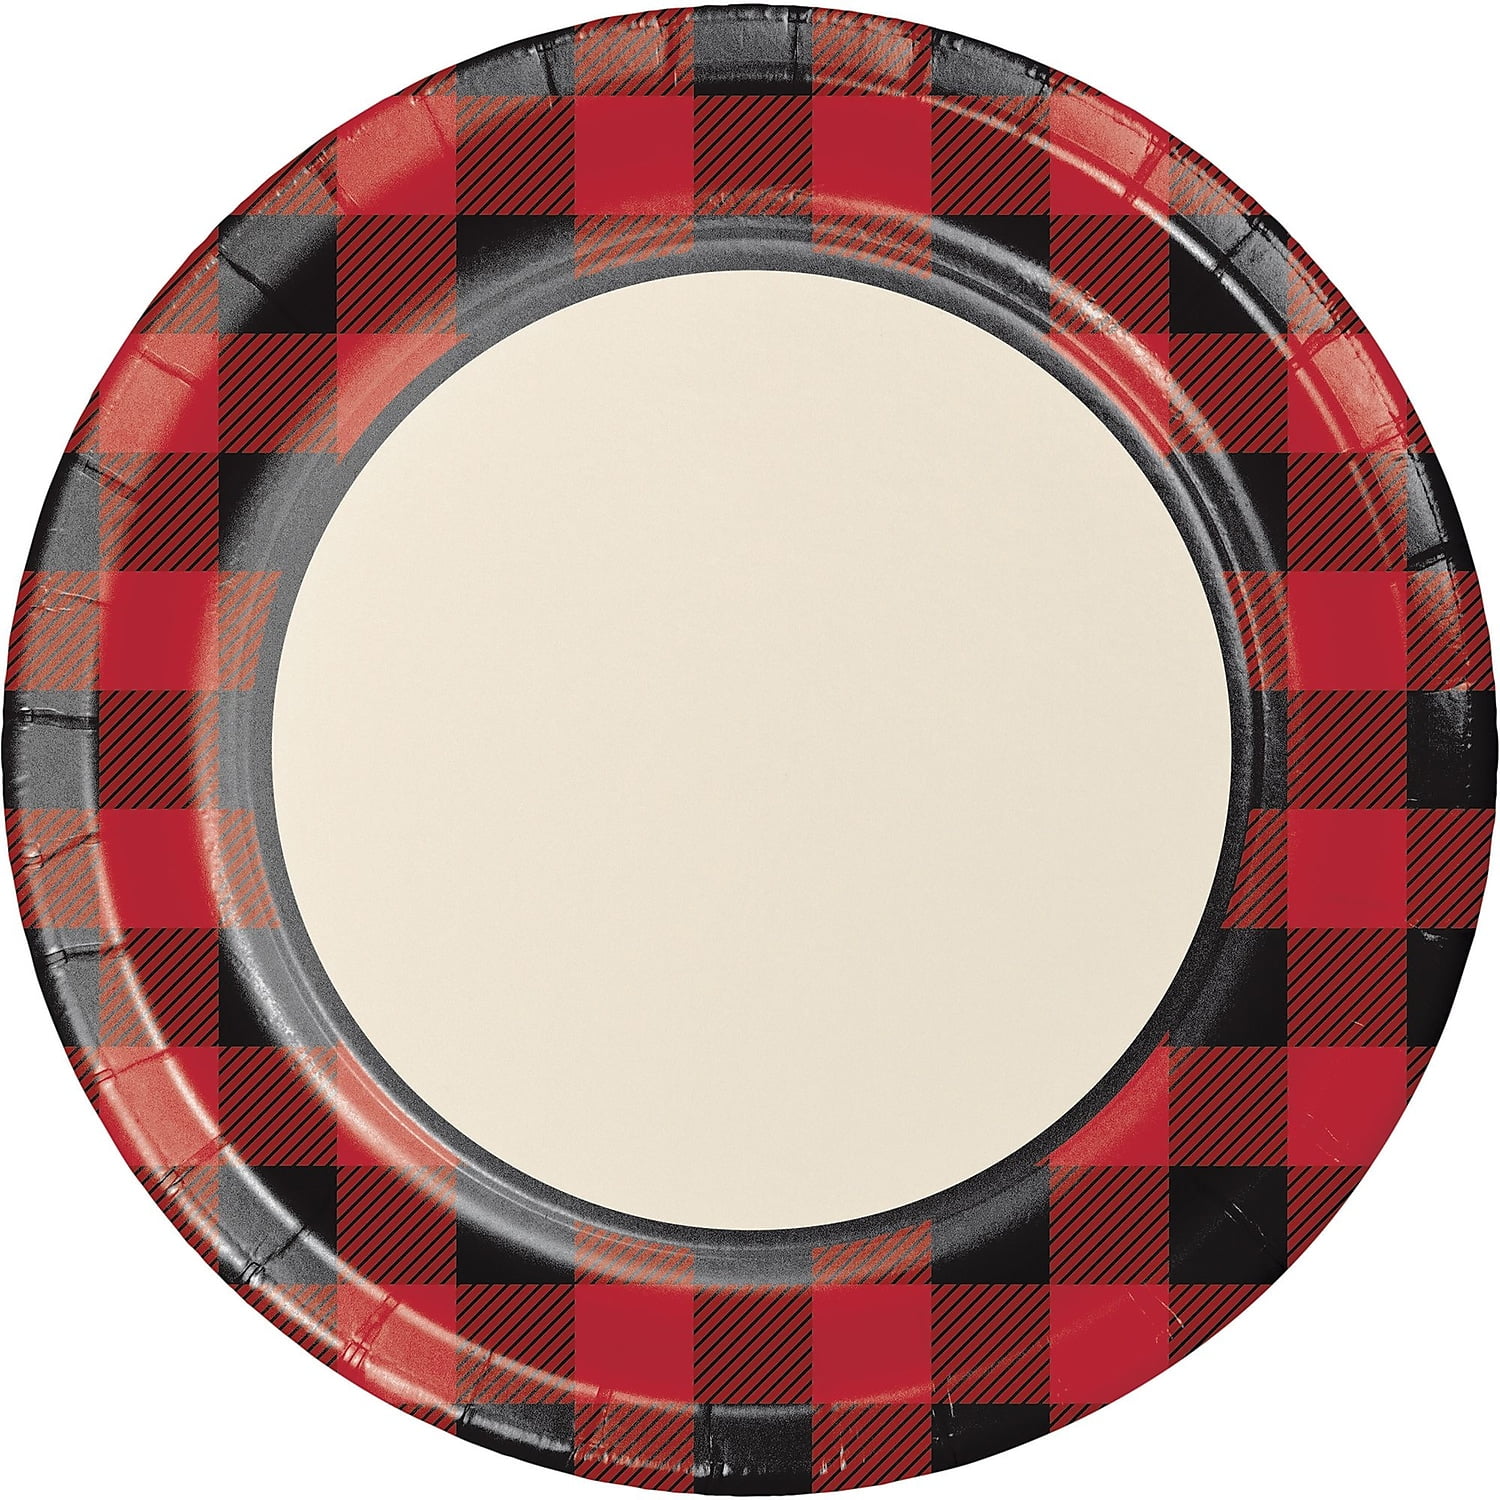 Dinner Size Red Buffalo Plaid Iconikal Disposable Paper Party Napkins 75-Count 